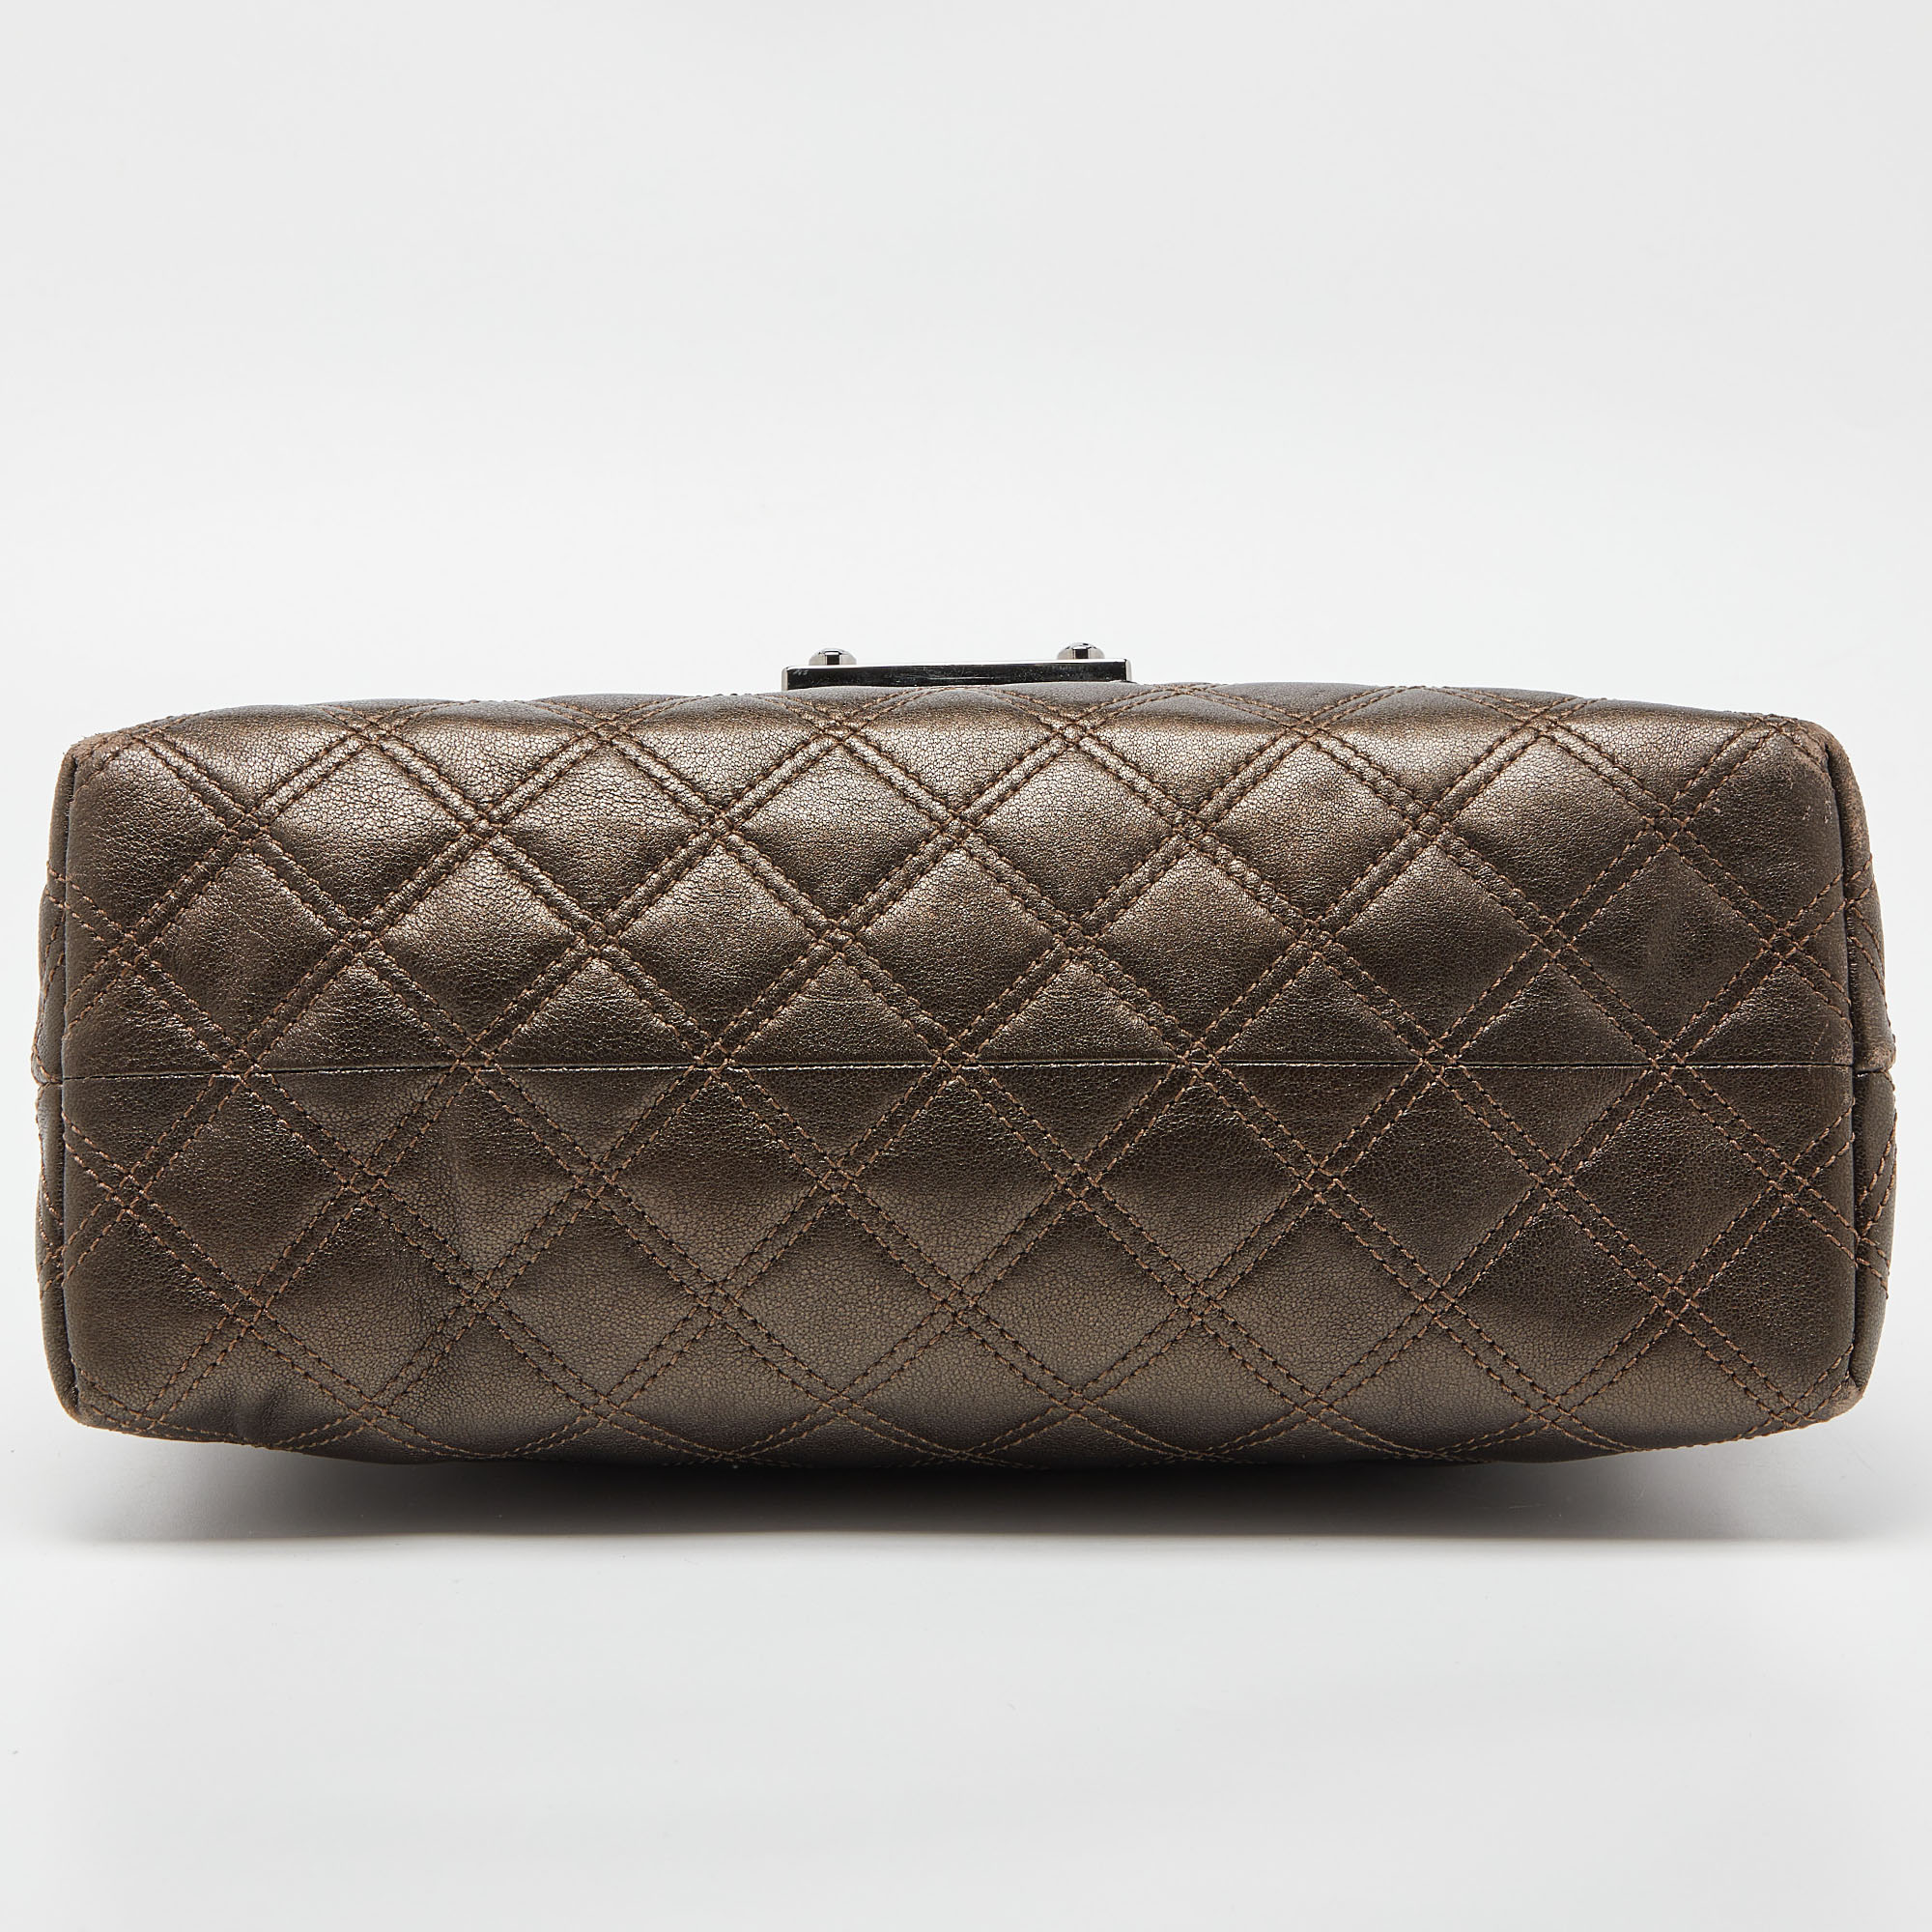 Marc Jacobs Metallic Quilted Leather Flap Shoulder Bag